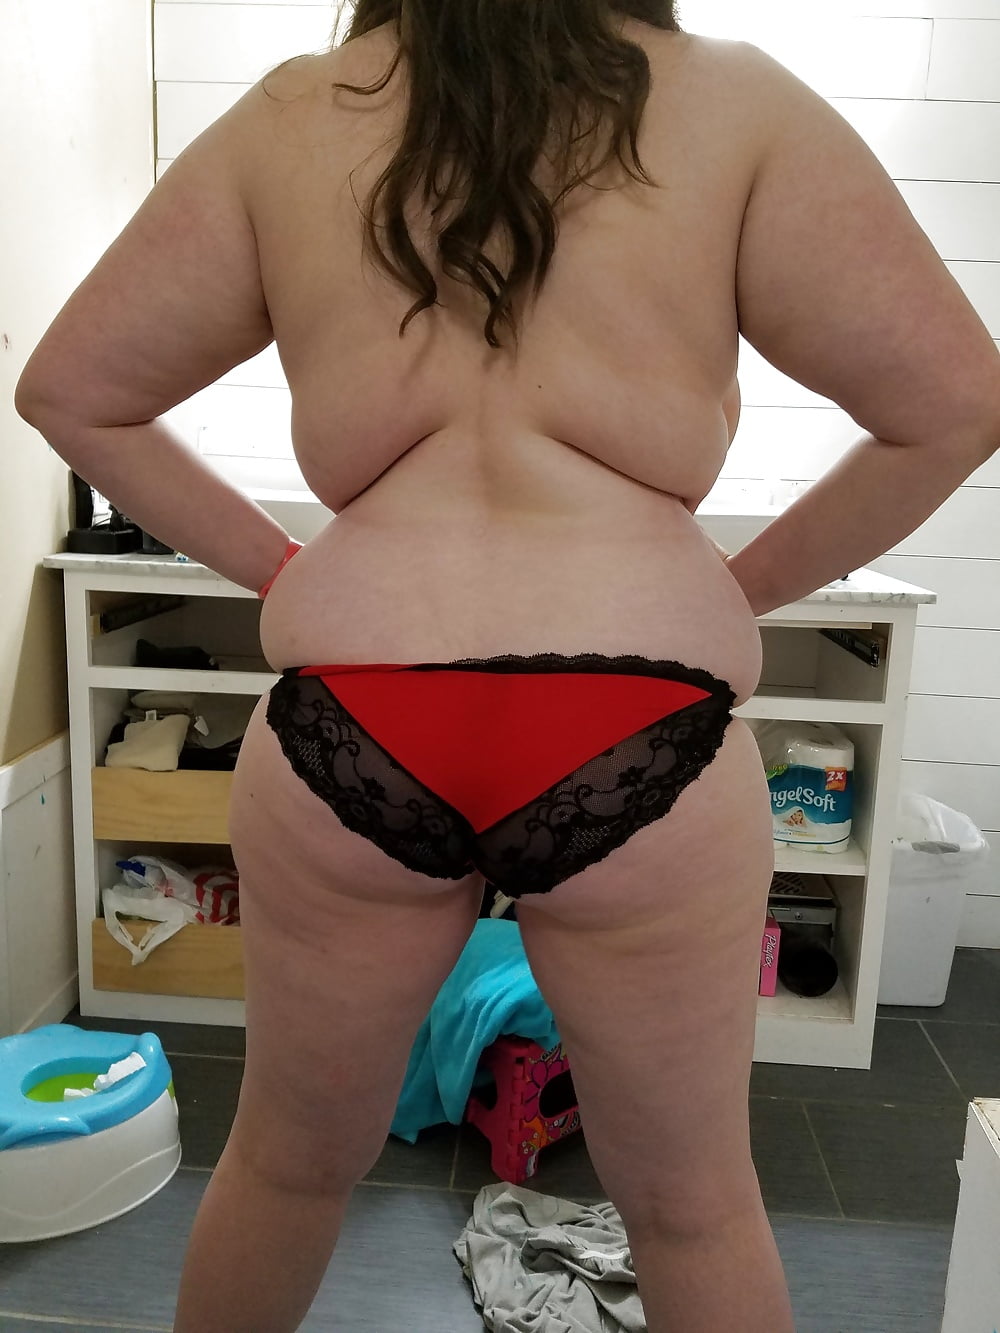 Bbw wife in lingerie and panties 9 image